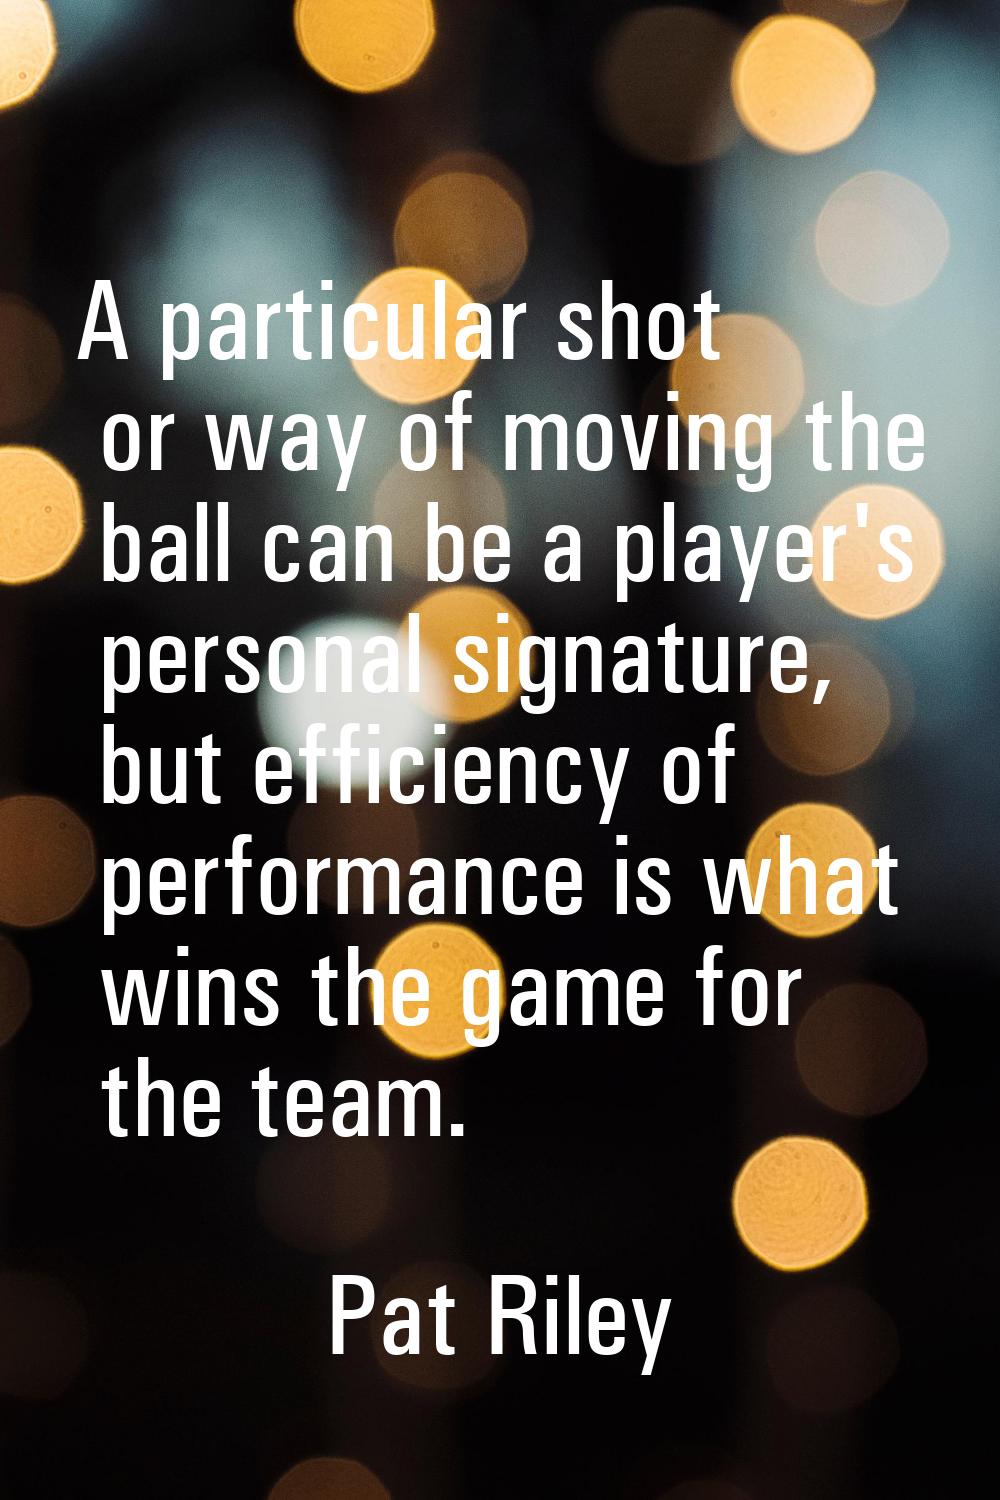 A particular shot or way of moving the ball can be a player's personal signature, but efficiency of